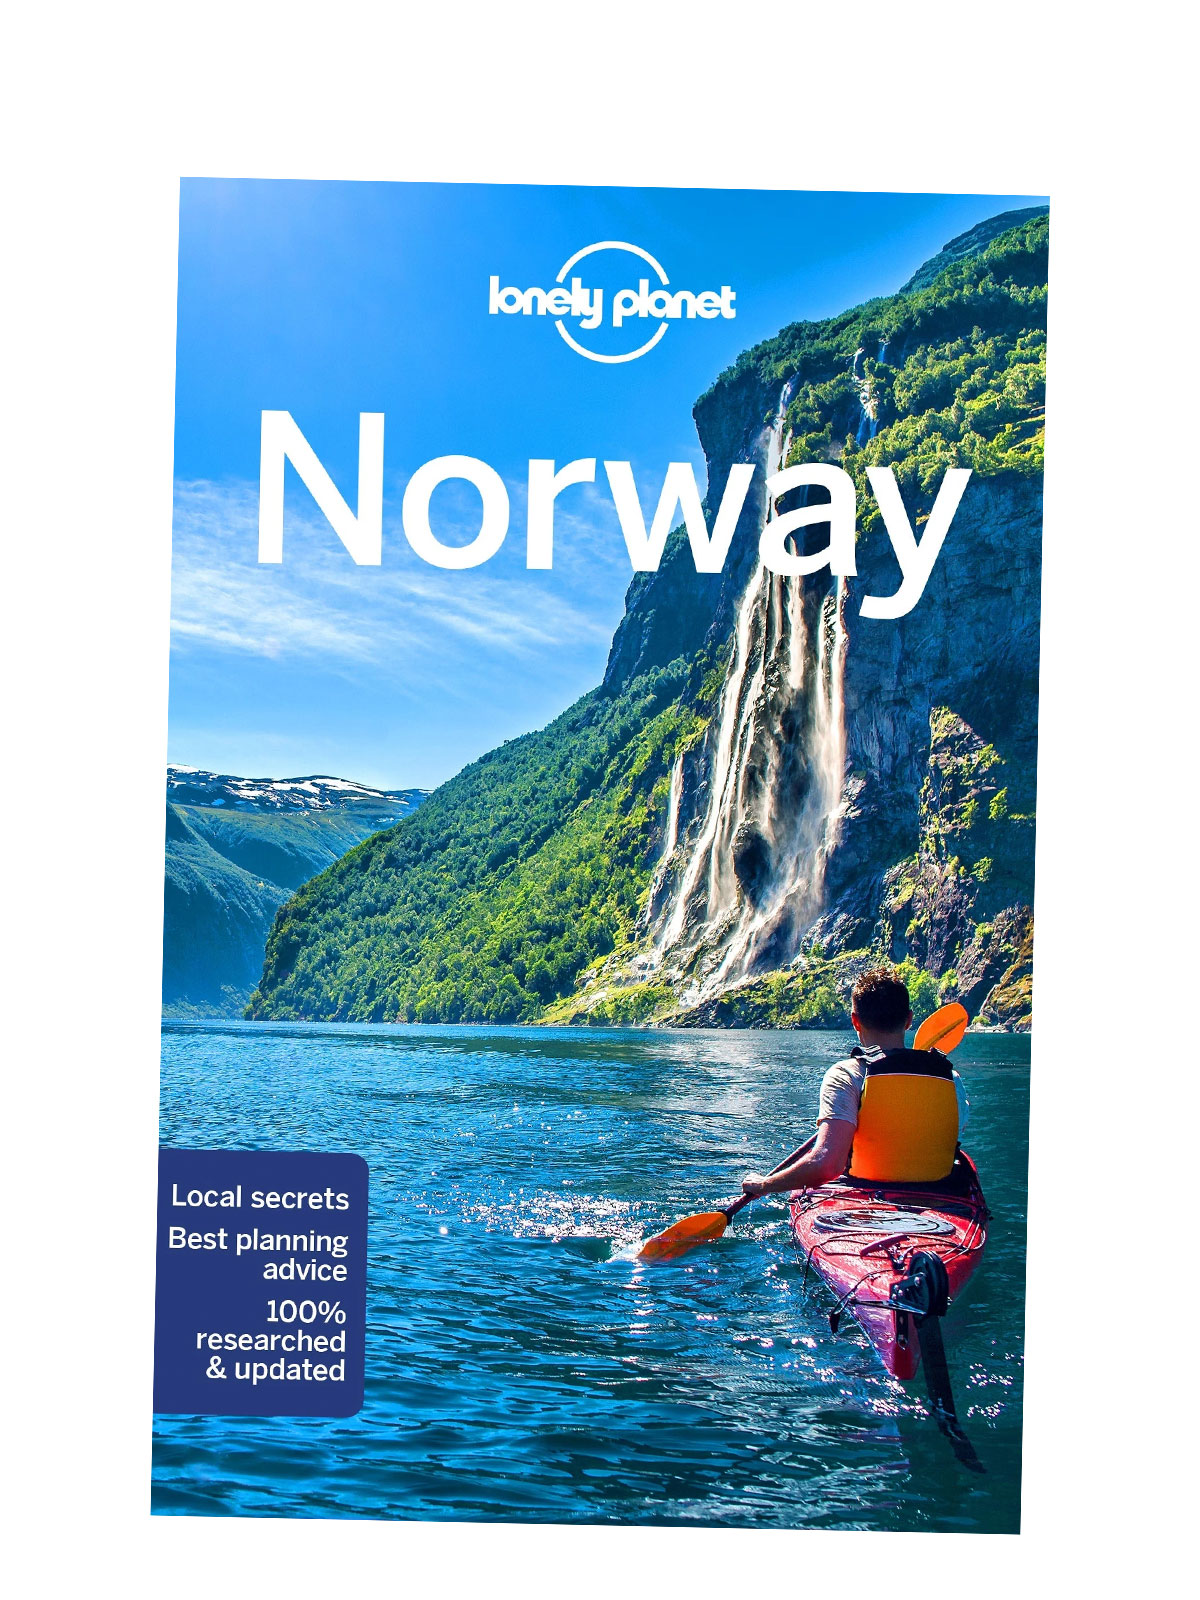 Norway Lonely Planet